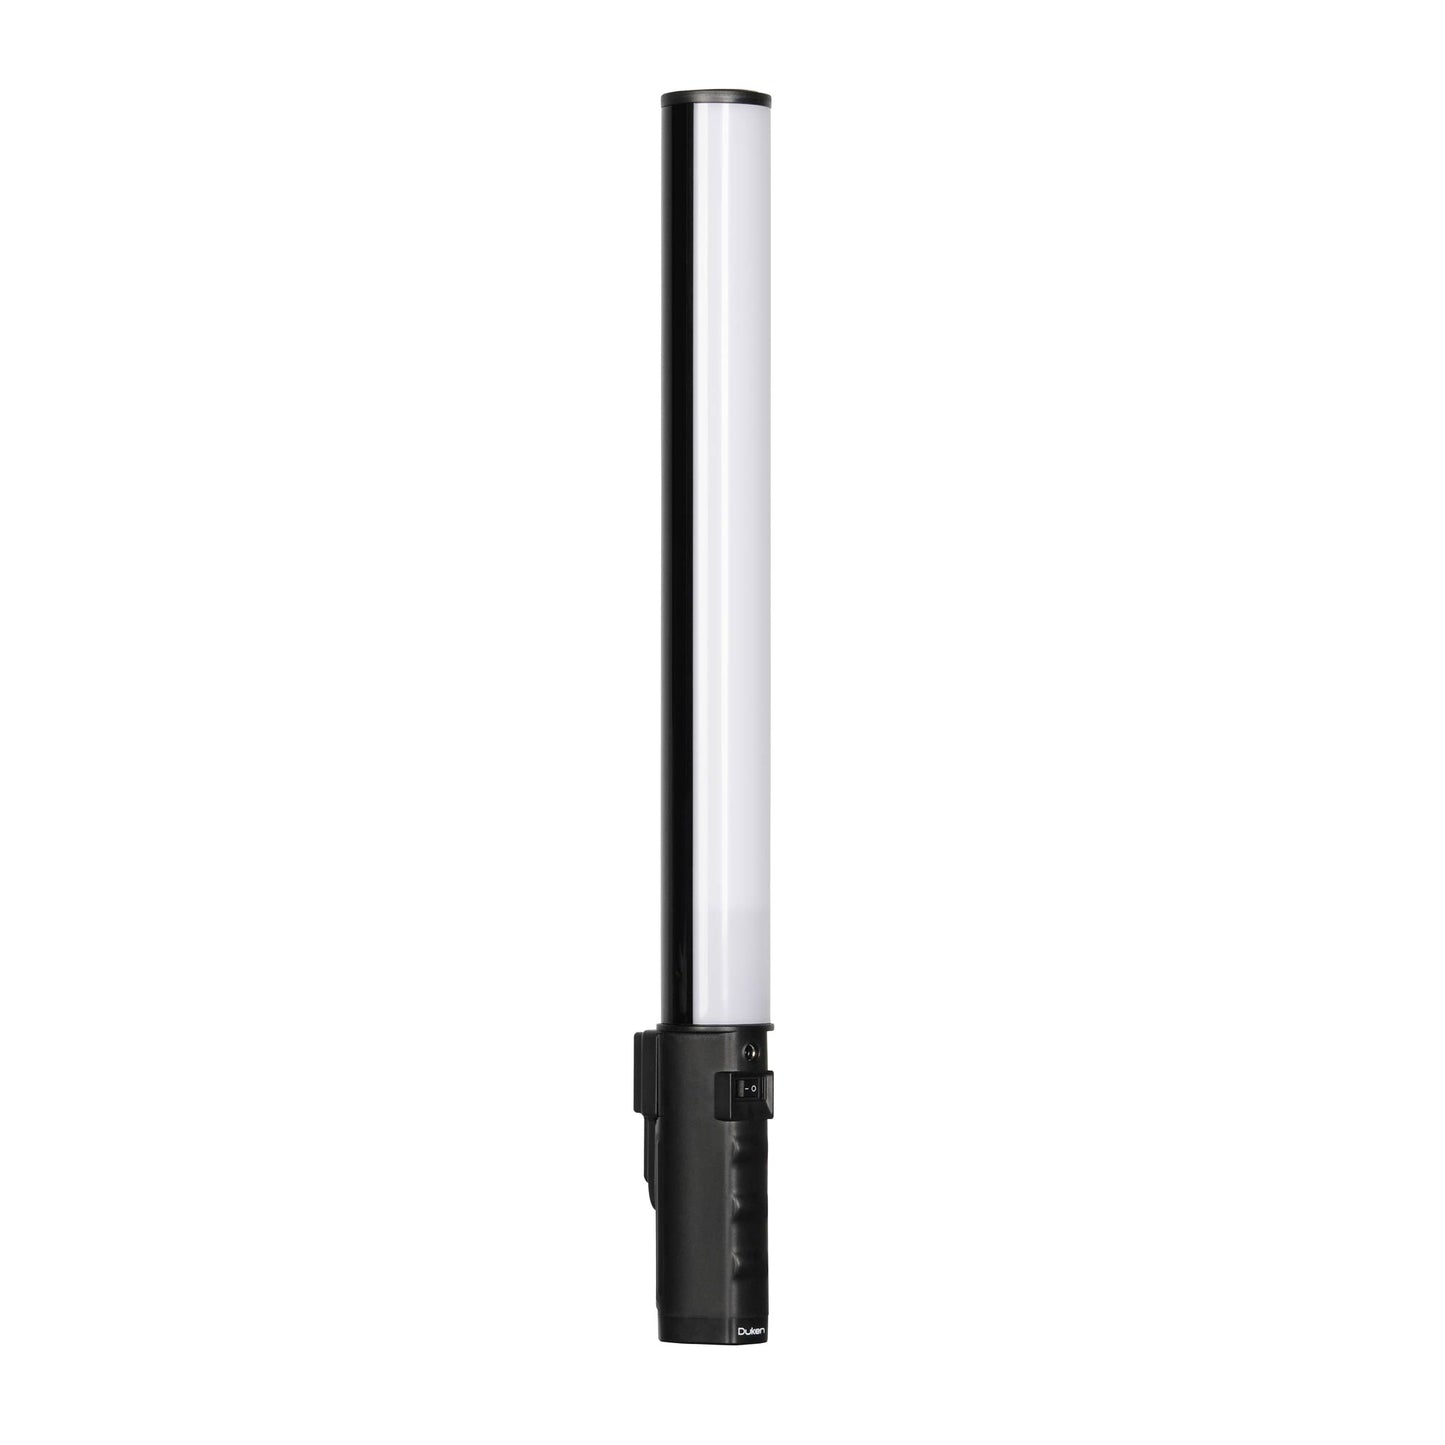 SIRUI Duken T60 Telescopic LED Light Stick 455-740 mm with Remote Control and App